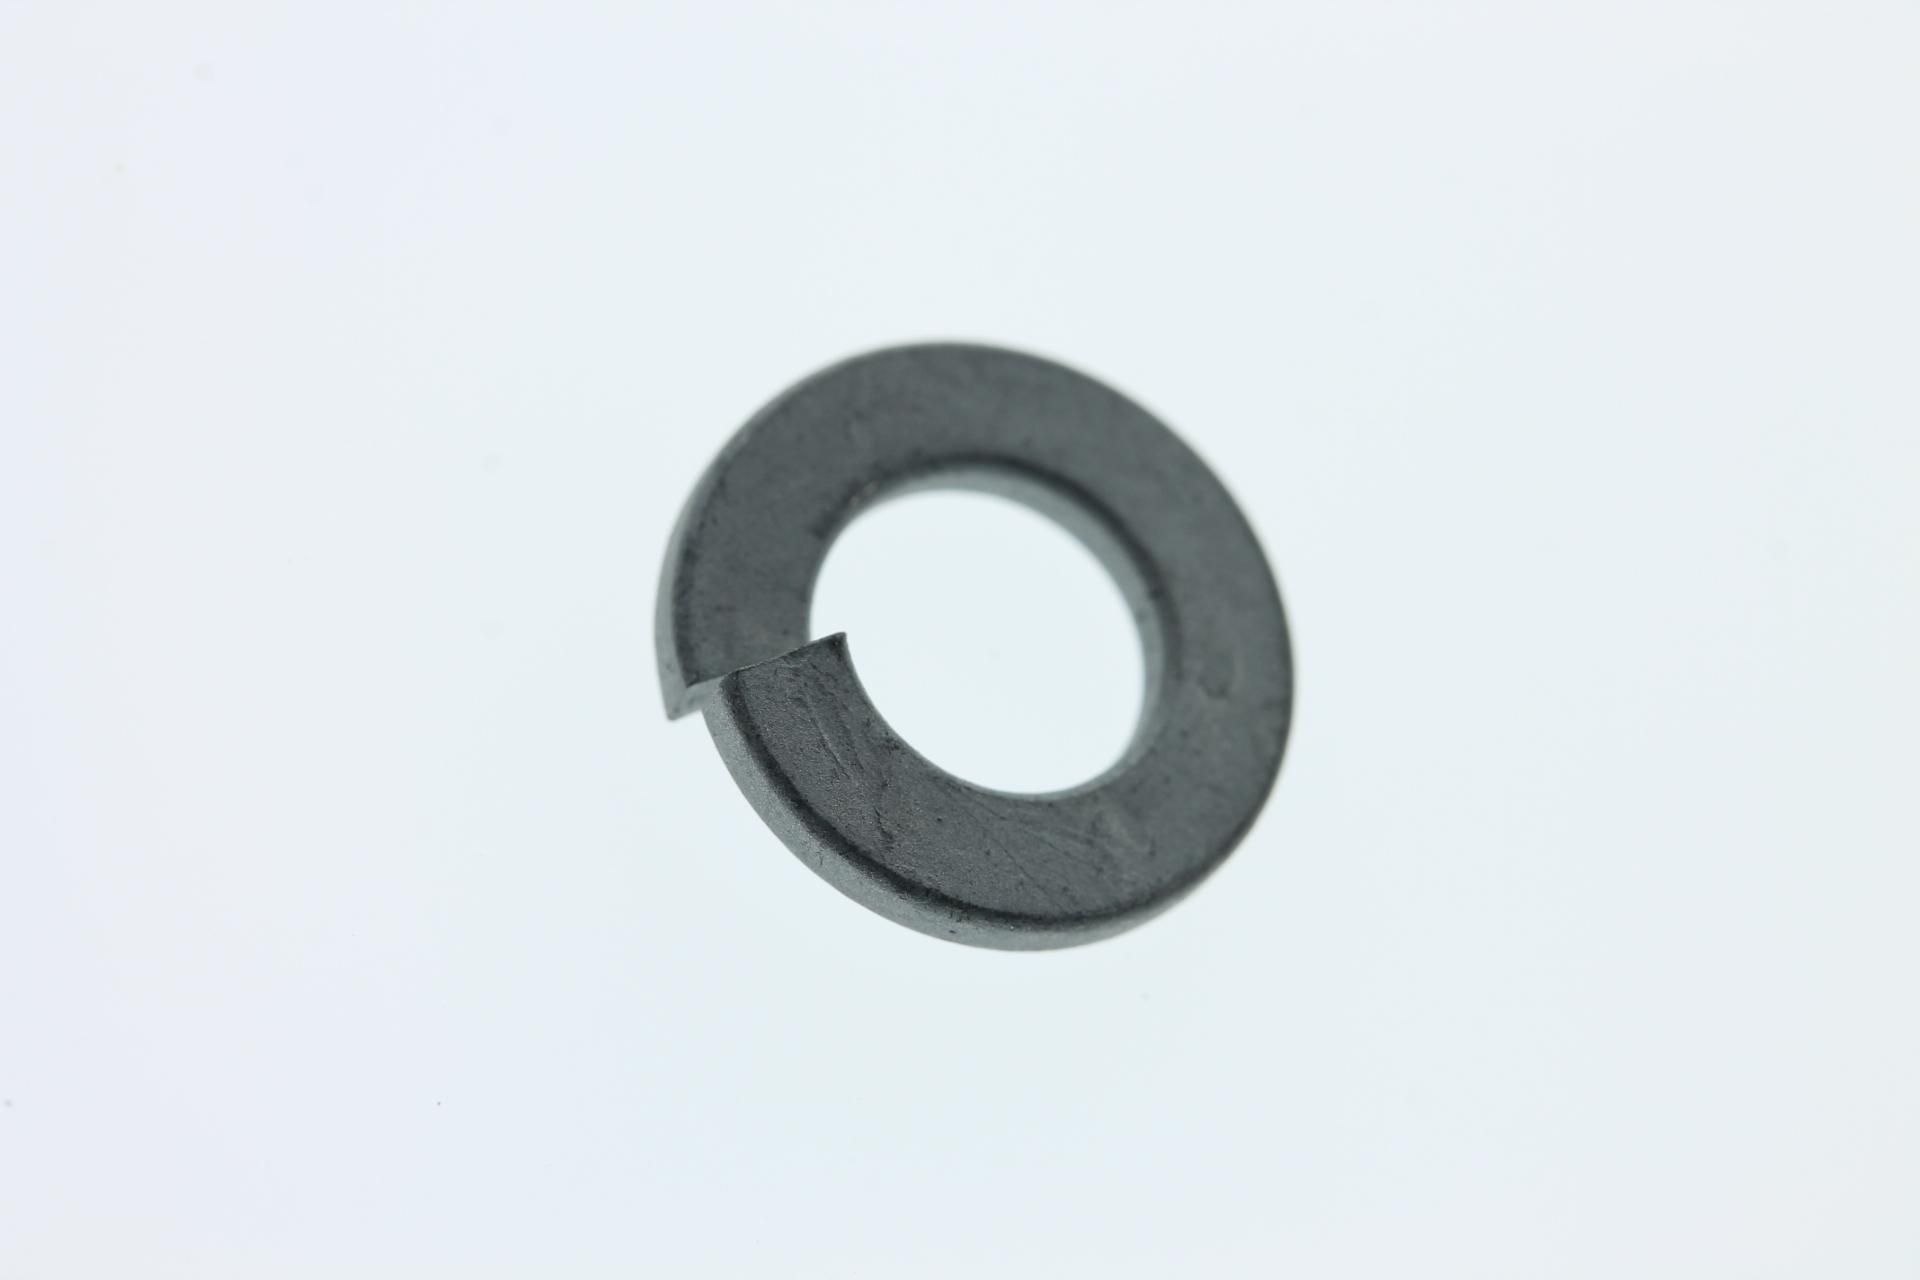 9290P-06100-00 Superseded by 92995-06100-00 - WASHER